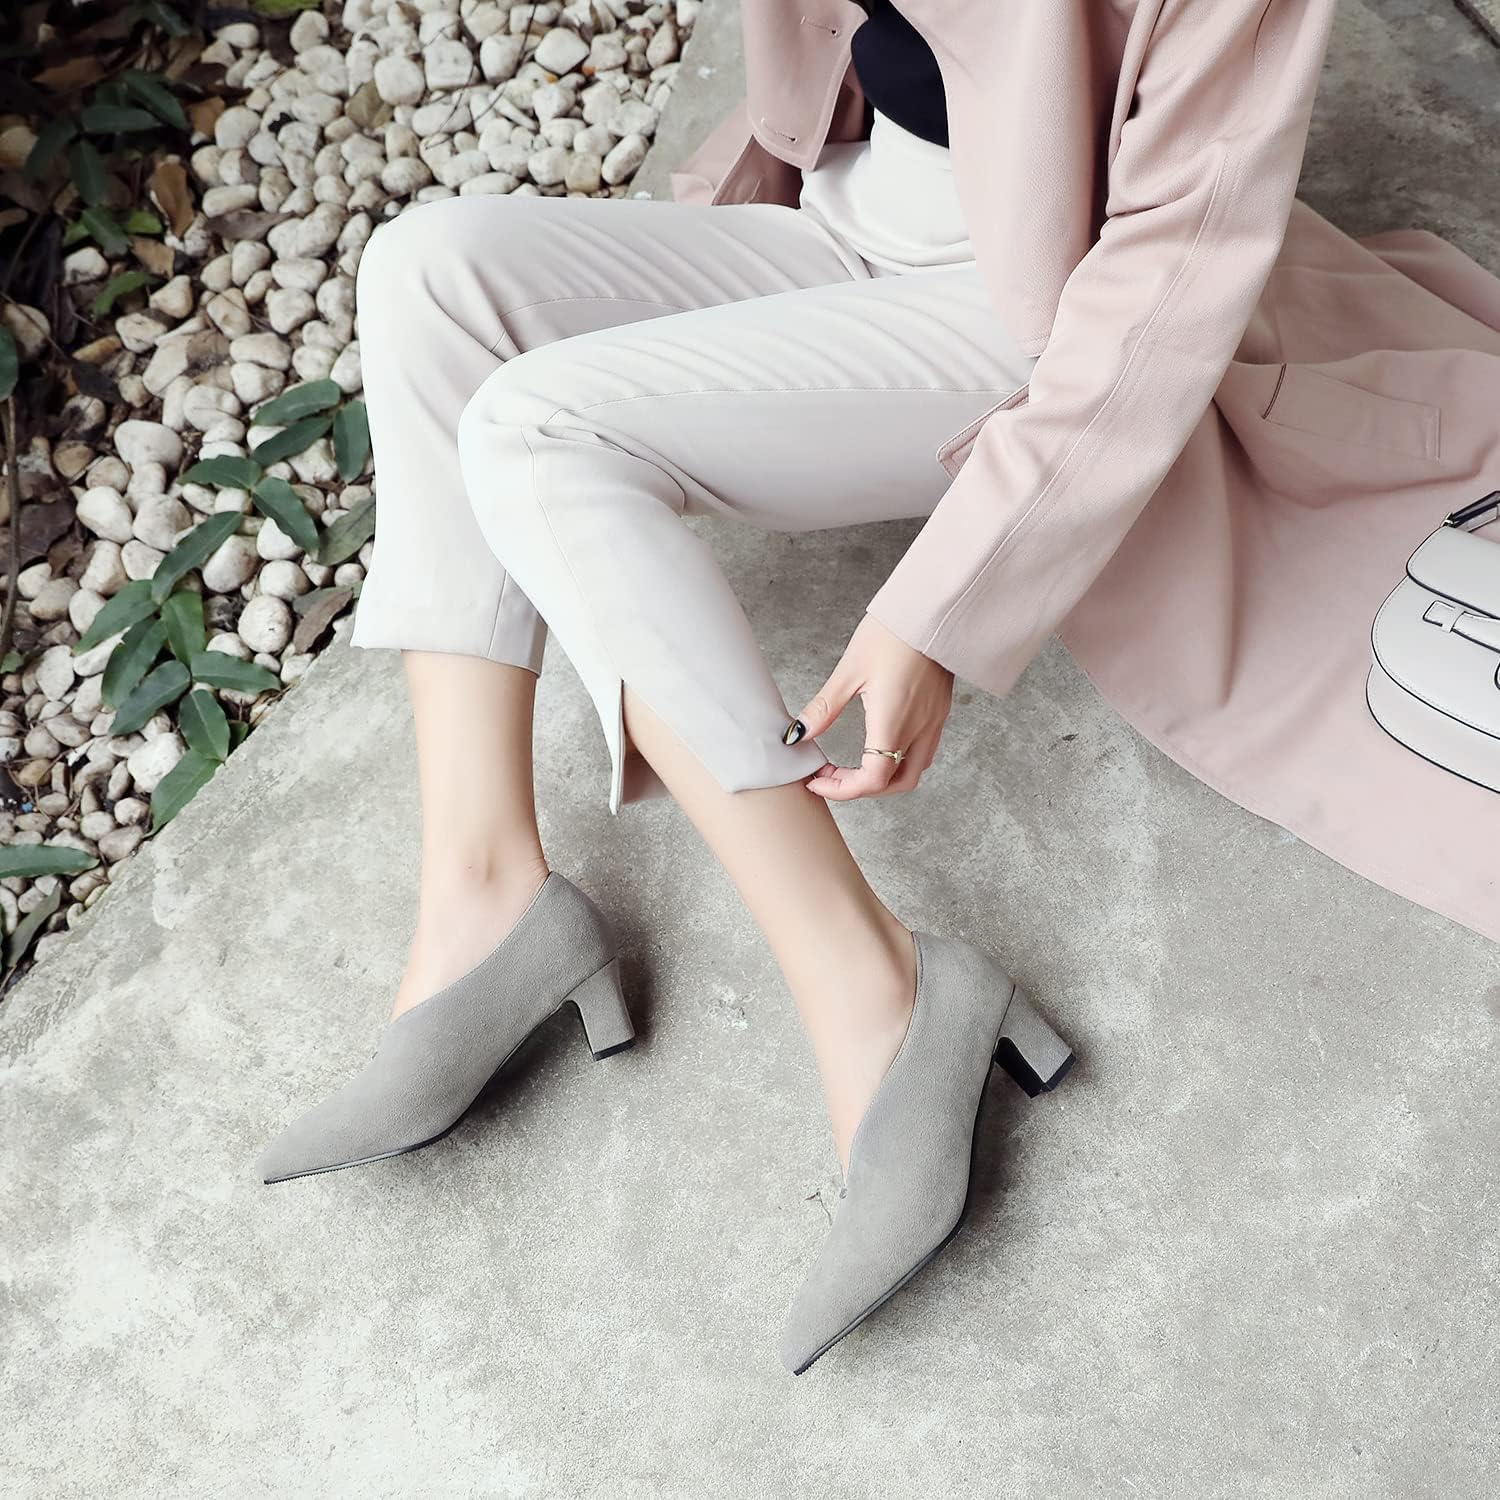 Women Comfortable Chunky Block Heel Pumps Shoes Pointed Toe Slip on Suede Penny Loafers 2” Mid Heel Closed Pointy Toe Work Shoes Office Patchwork Ladies Dressy Fall Fashion Elegant 4-13 M US